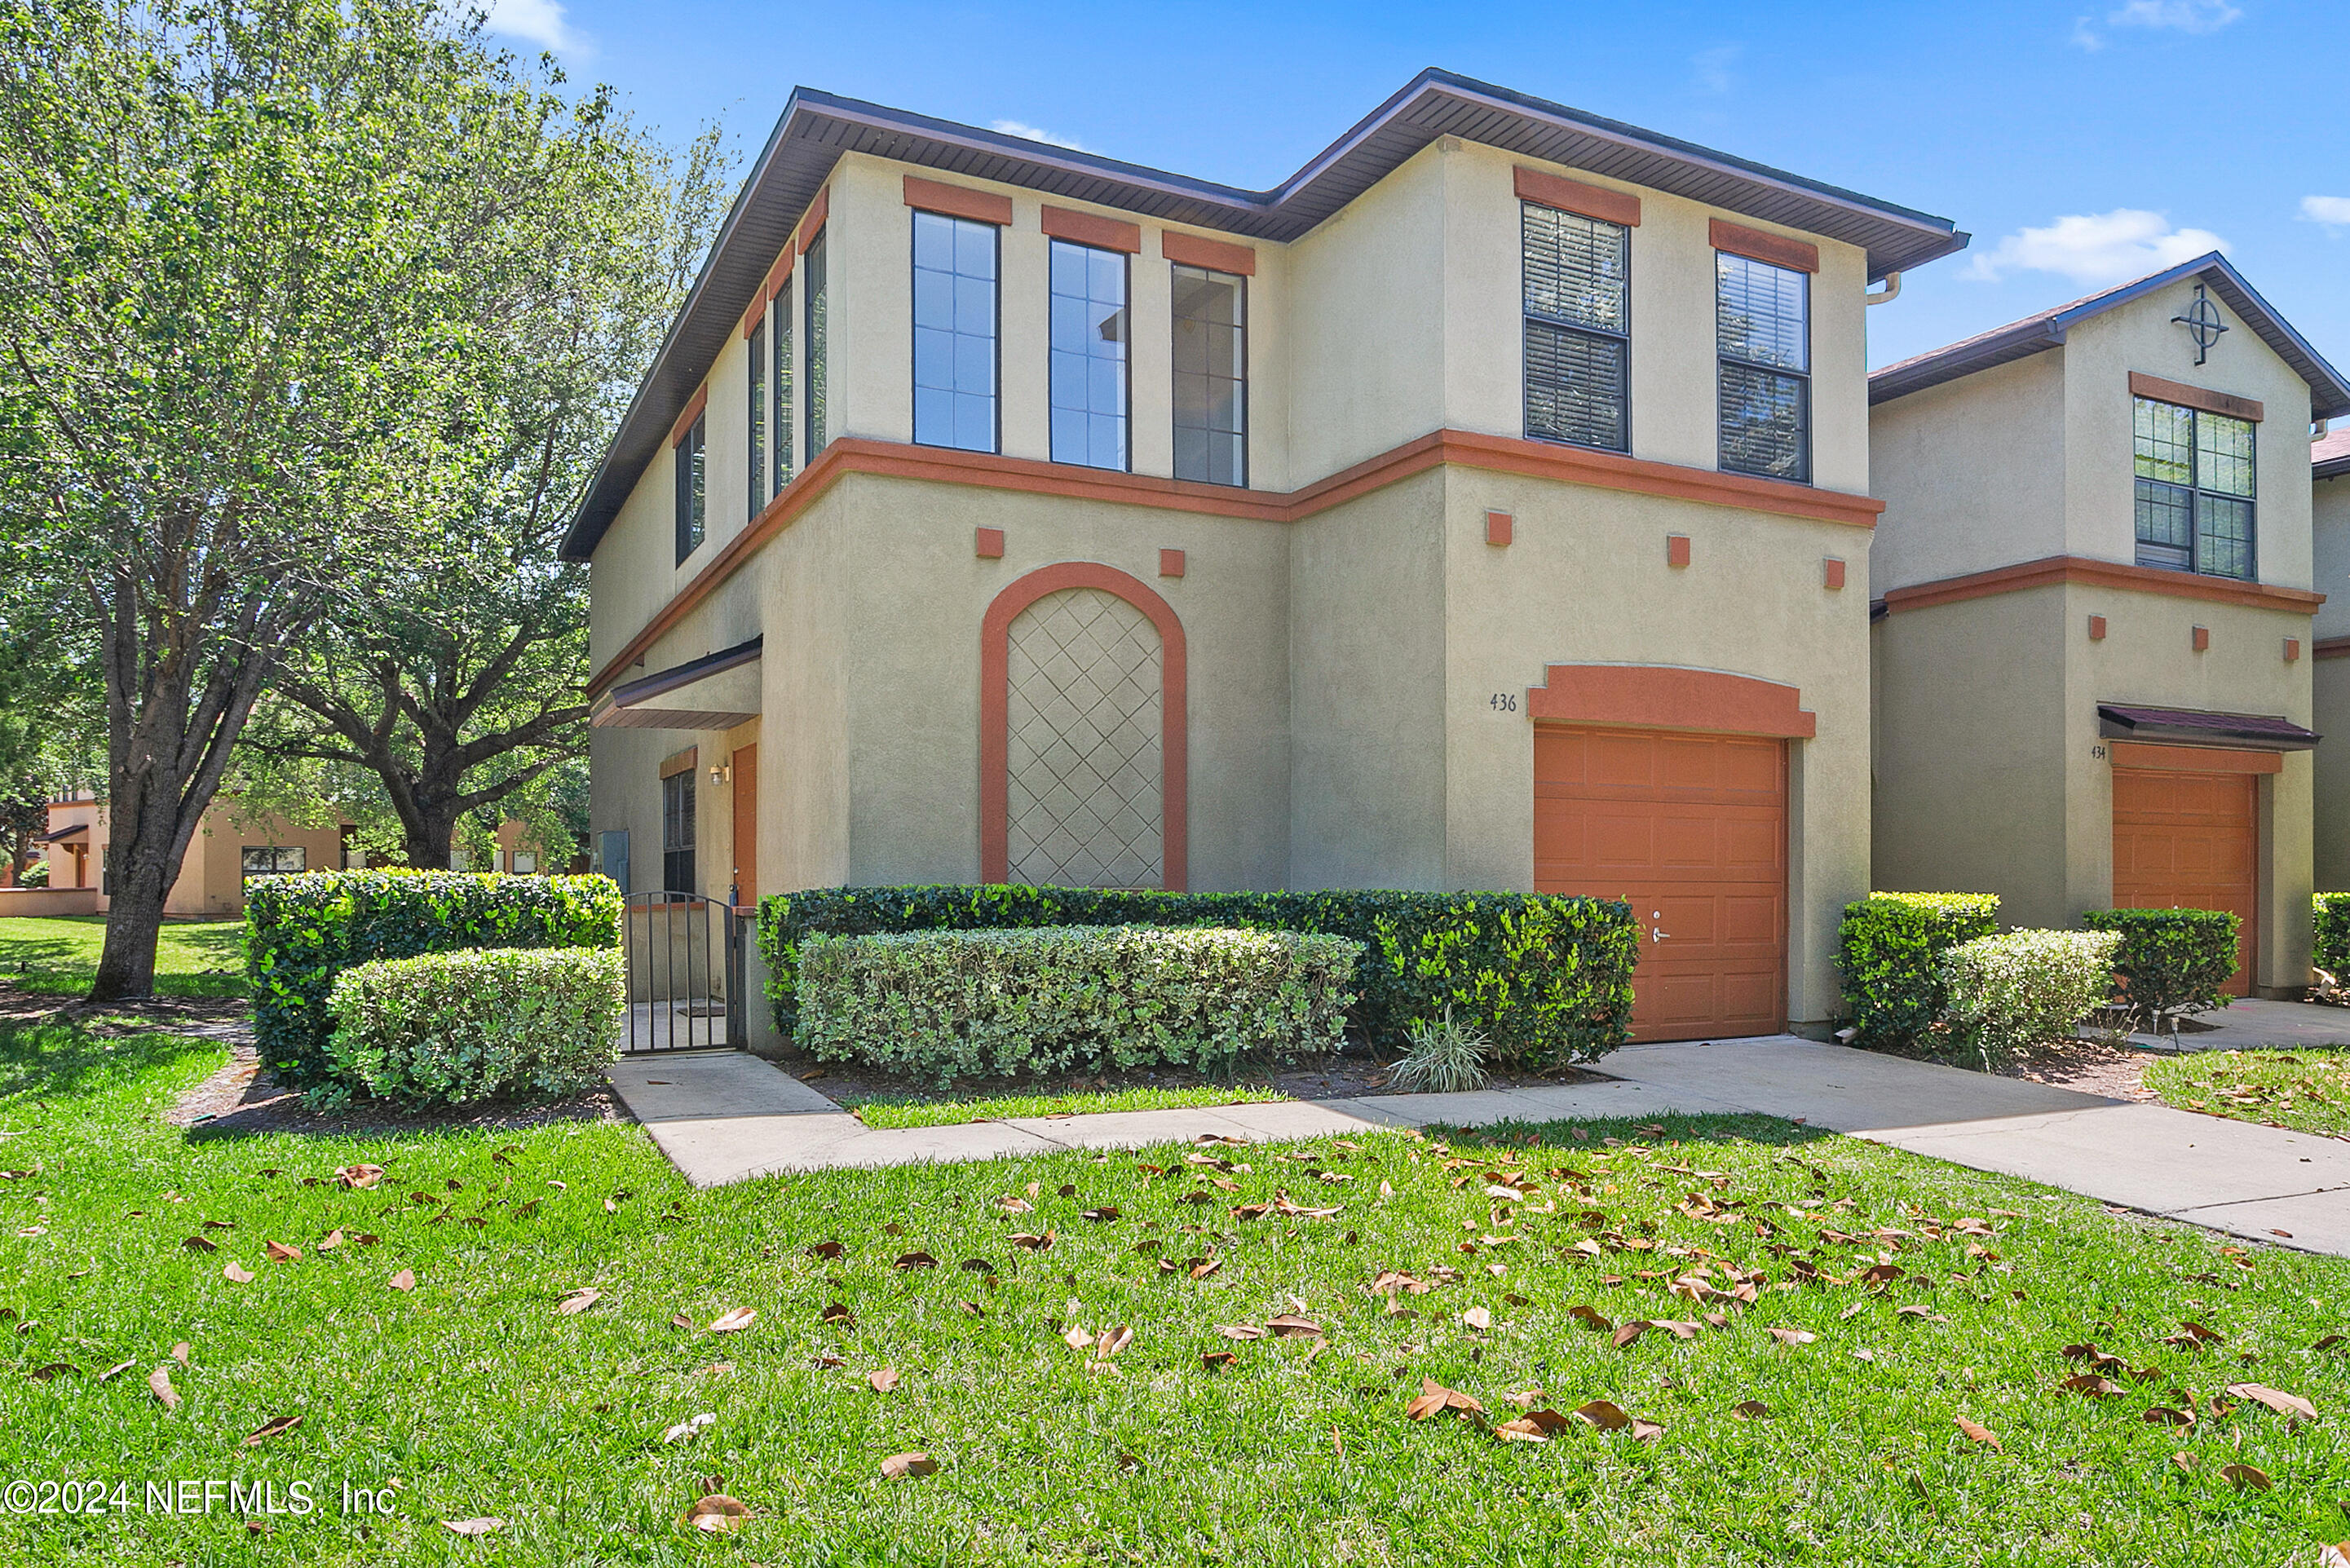 St Johns, FL home for sale located at 436 Honeycomb Way, St Johns, FL 32259